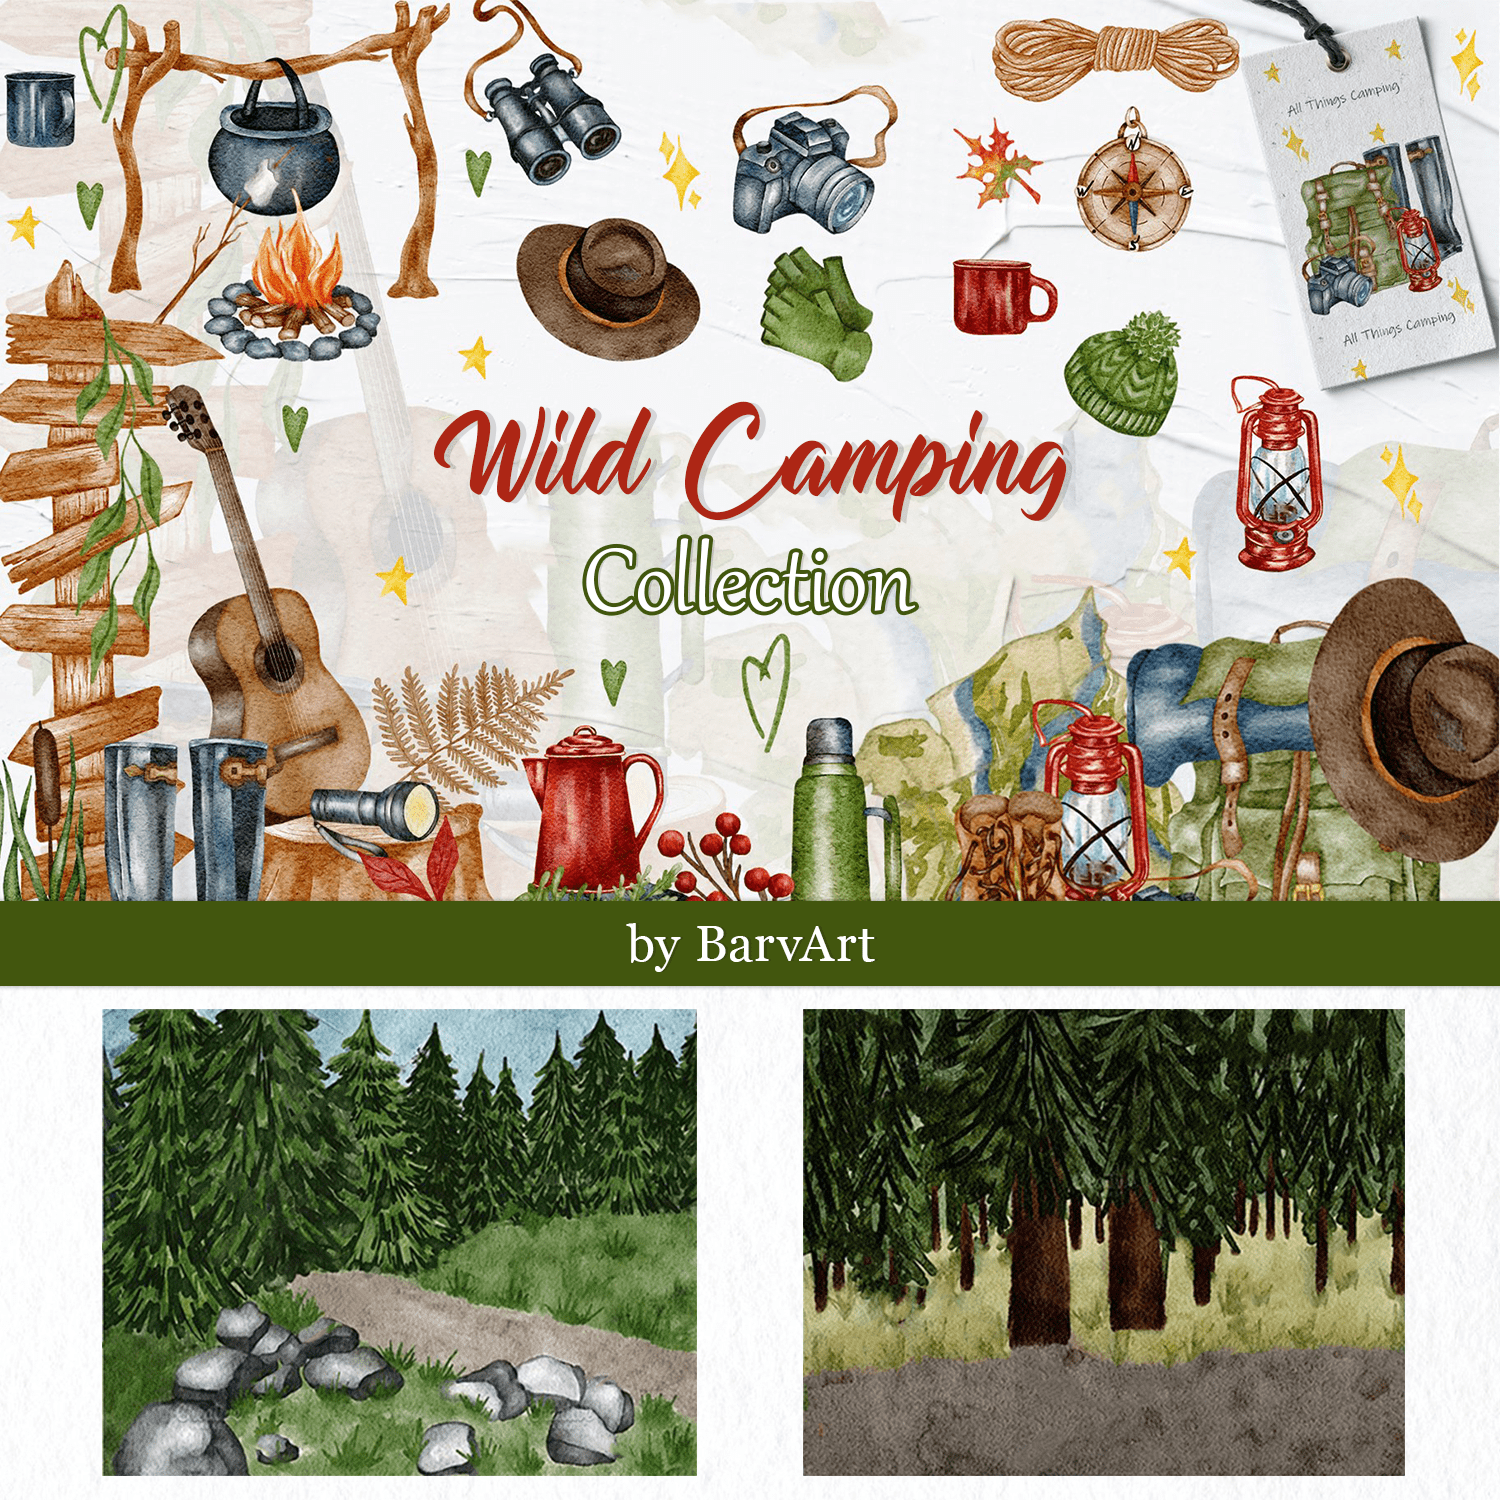 Wild camping collection - main image preview.